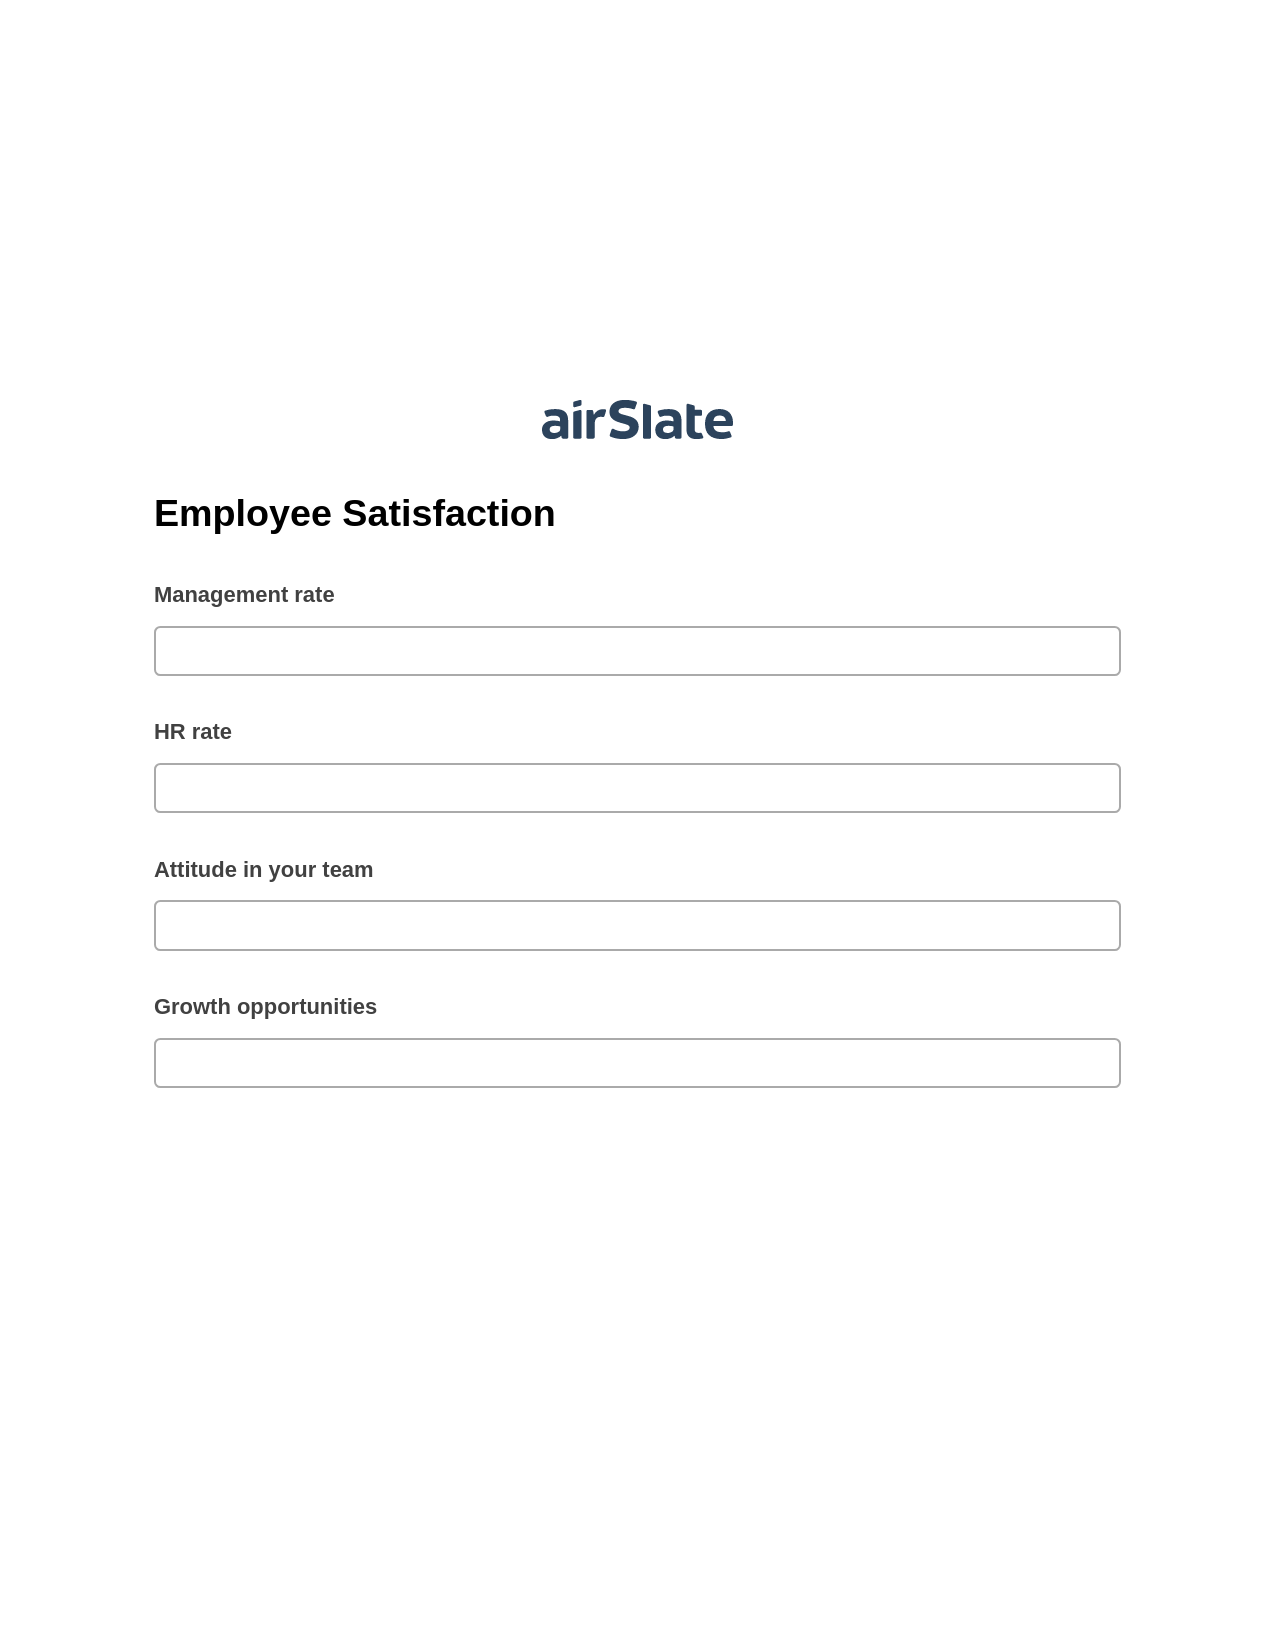 Employee Satisfaction Pre-fill from another Slate Bot, Create QuickBooks invoice Bot, Dropbox Bot